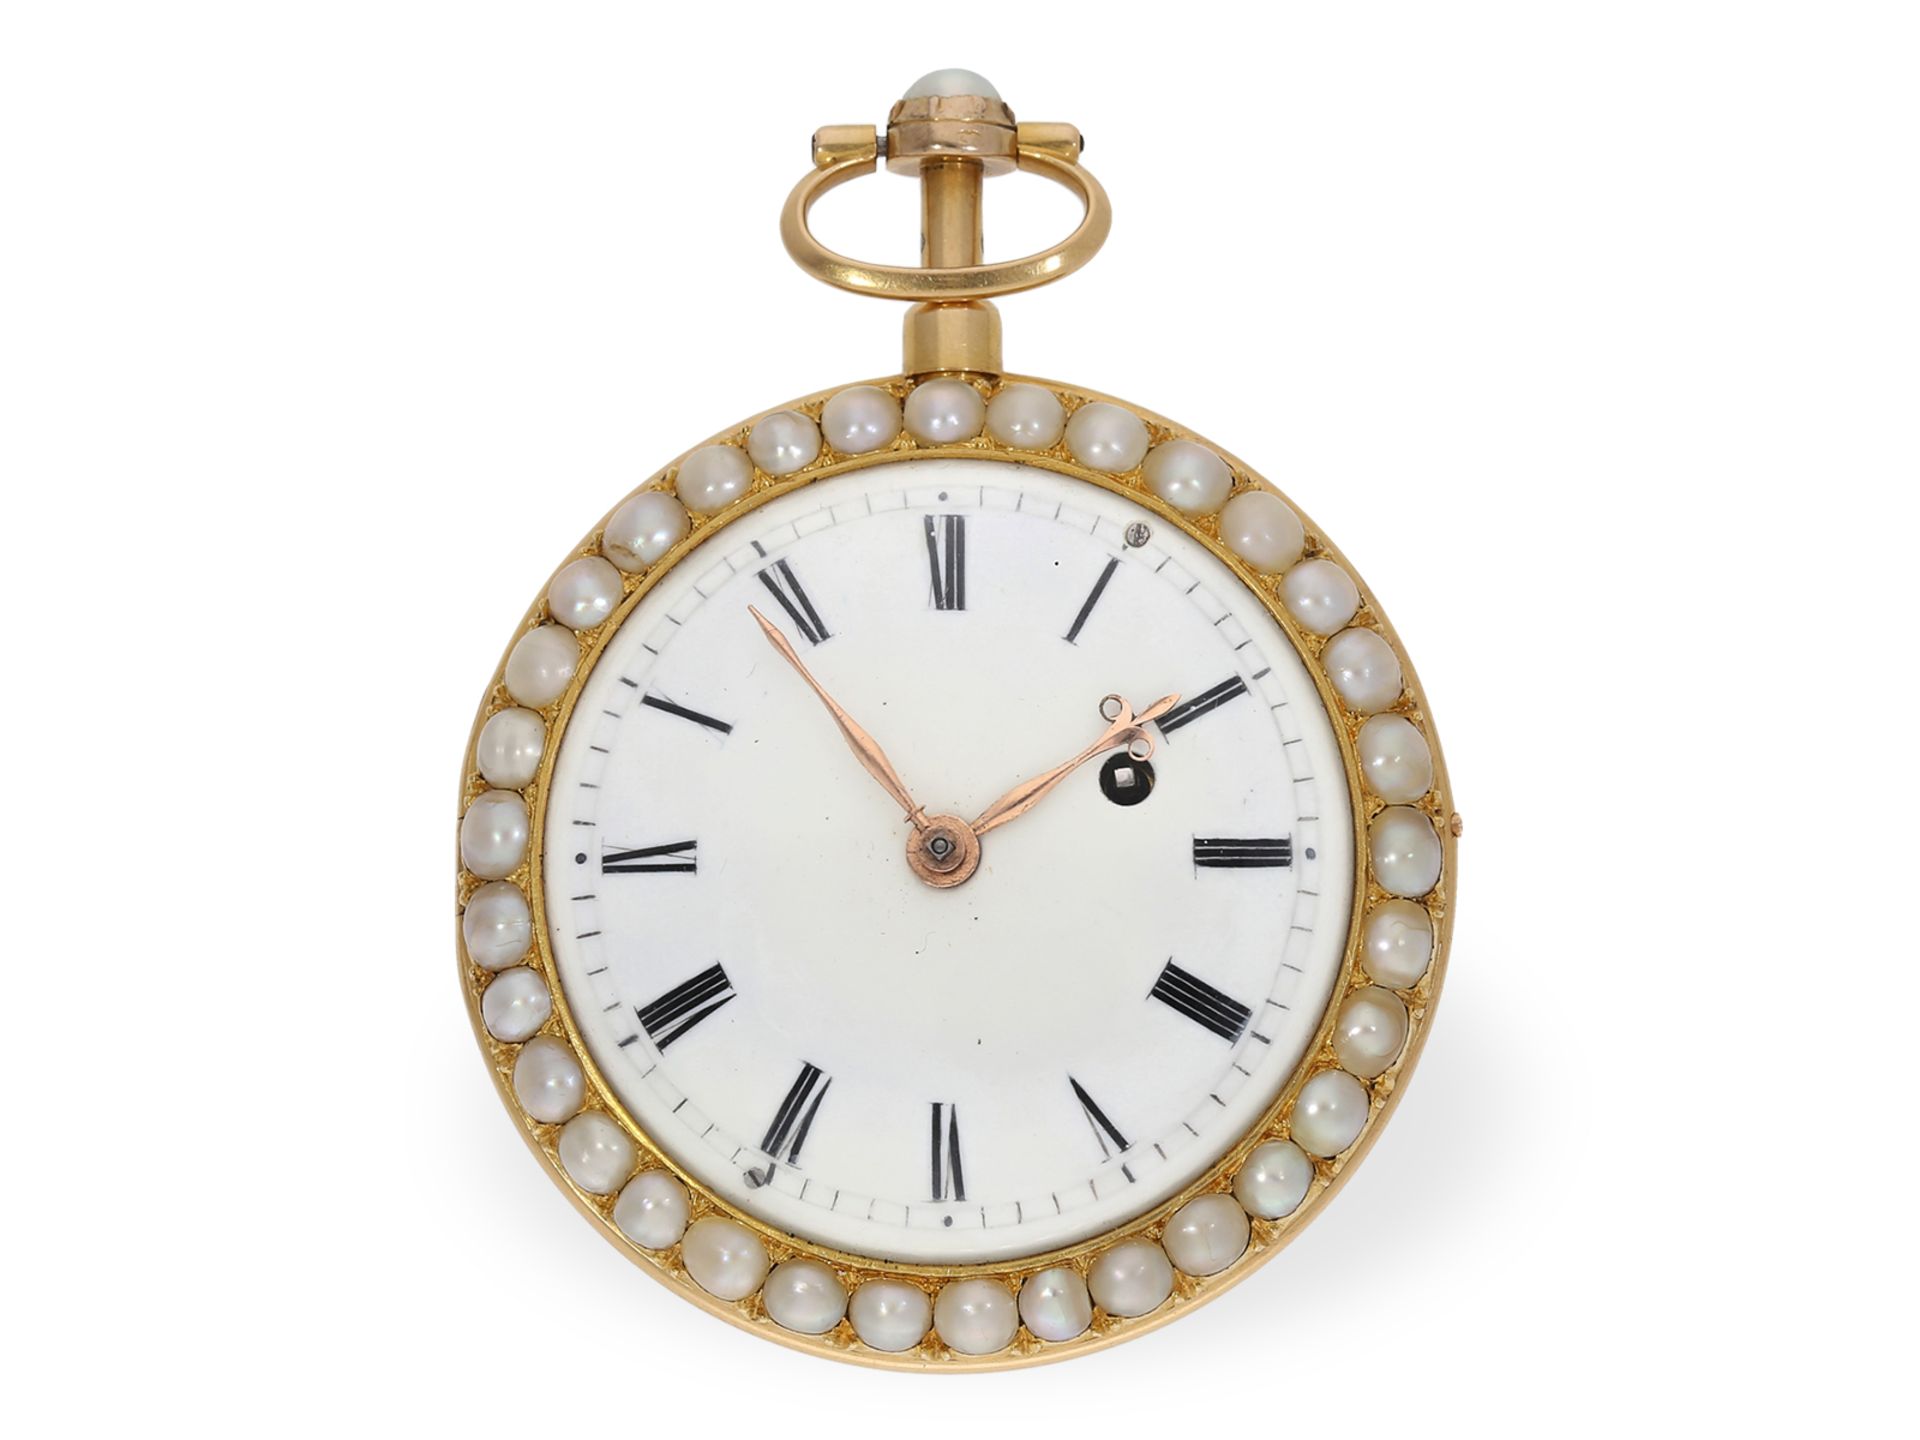 Pocket watch: very fine gold/enamel verge watch set with Oriental pearls and repeater, ca. 1800 - Image 3 of 5